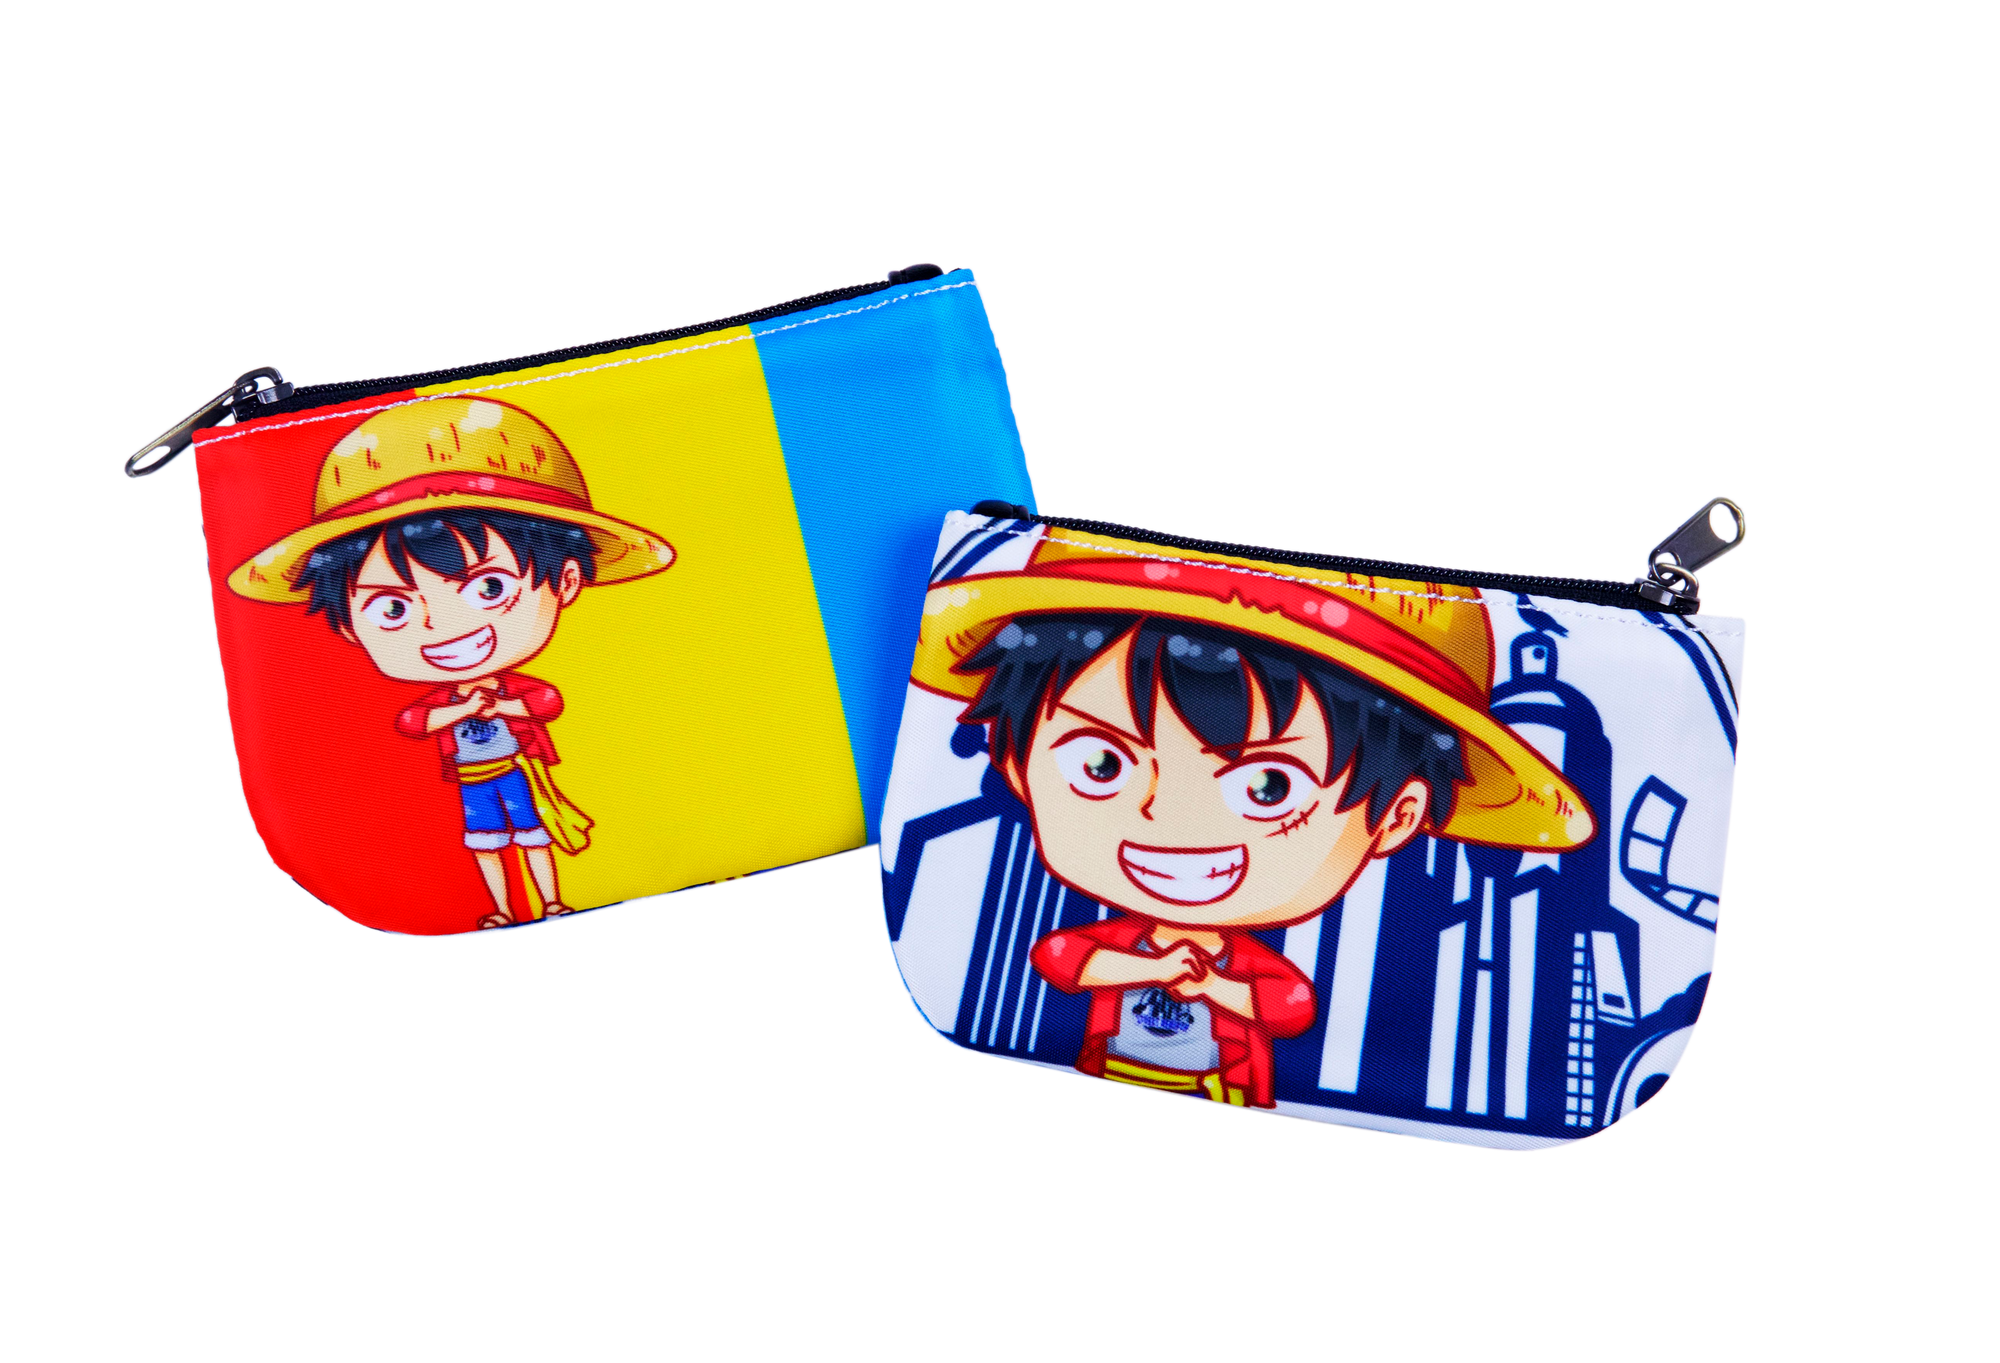 Anime Coin Purse - Mini Hand Bag - Travel Pocket Wallet For Change And Accessories